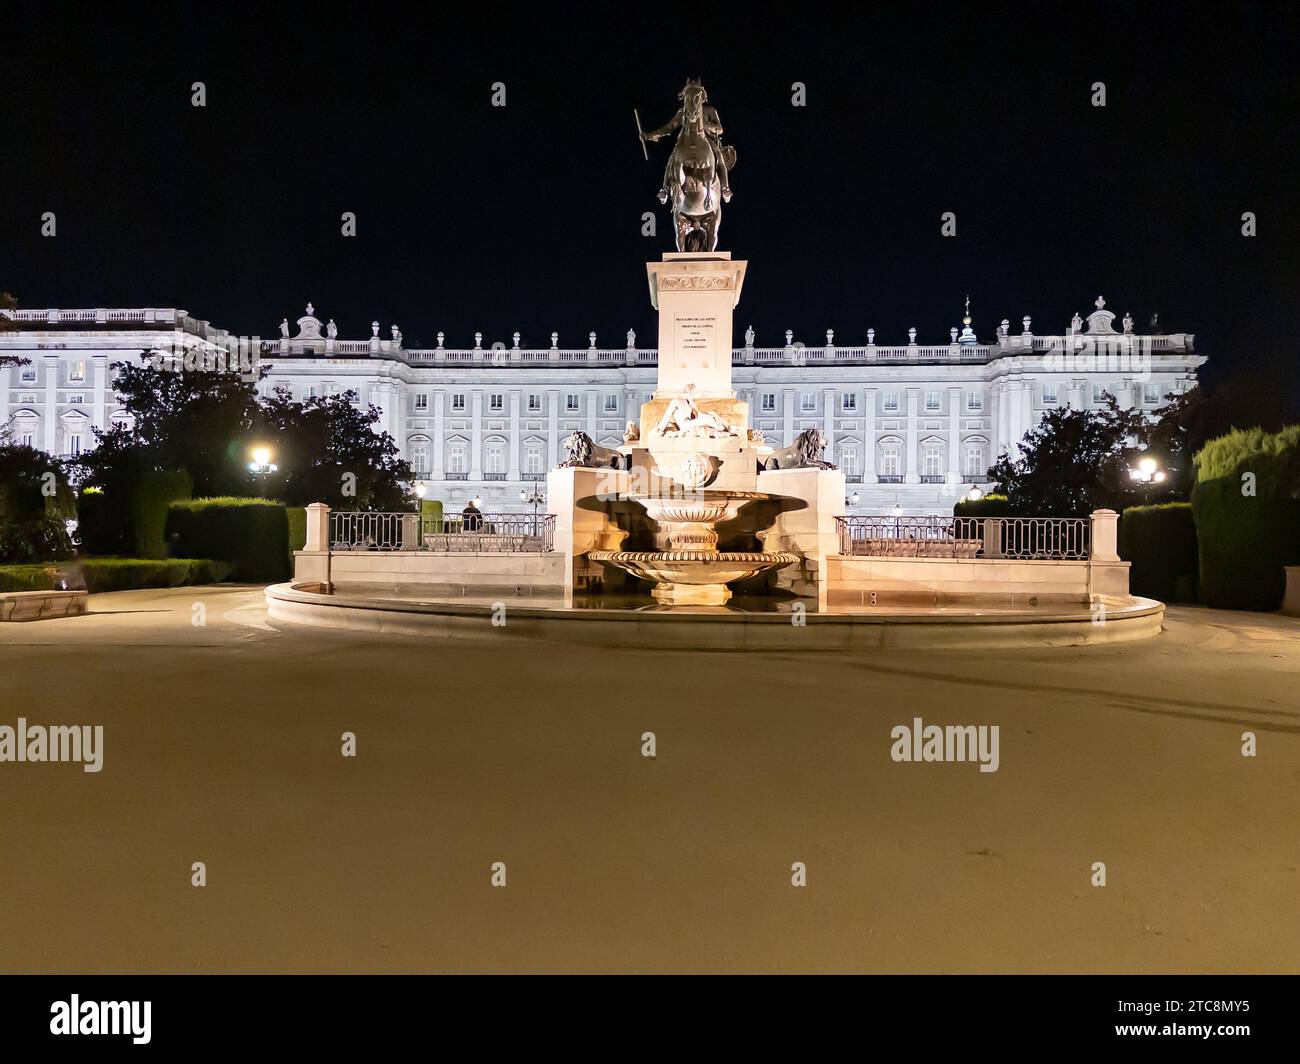 Jardines de Lepanto and near the historic Royal Palace in Madrid, Spain at night Stock Photo